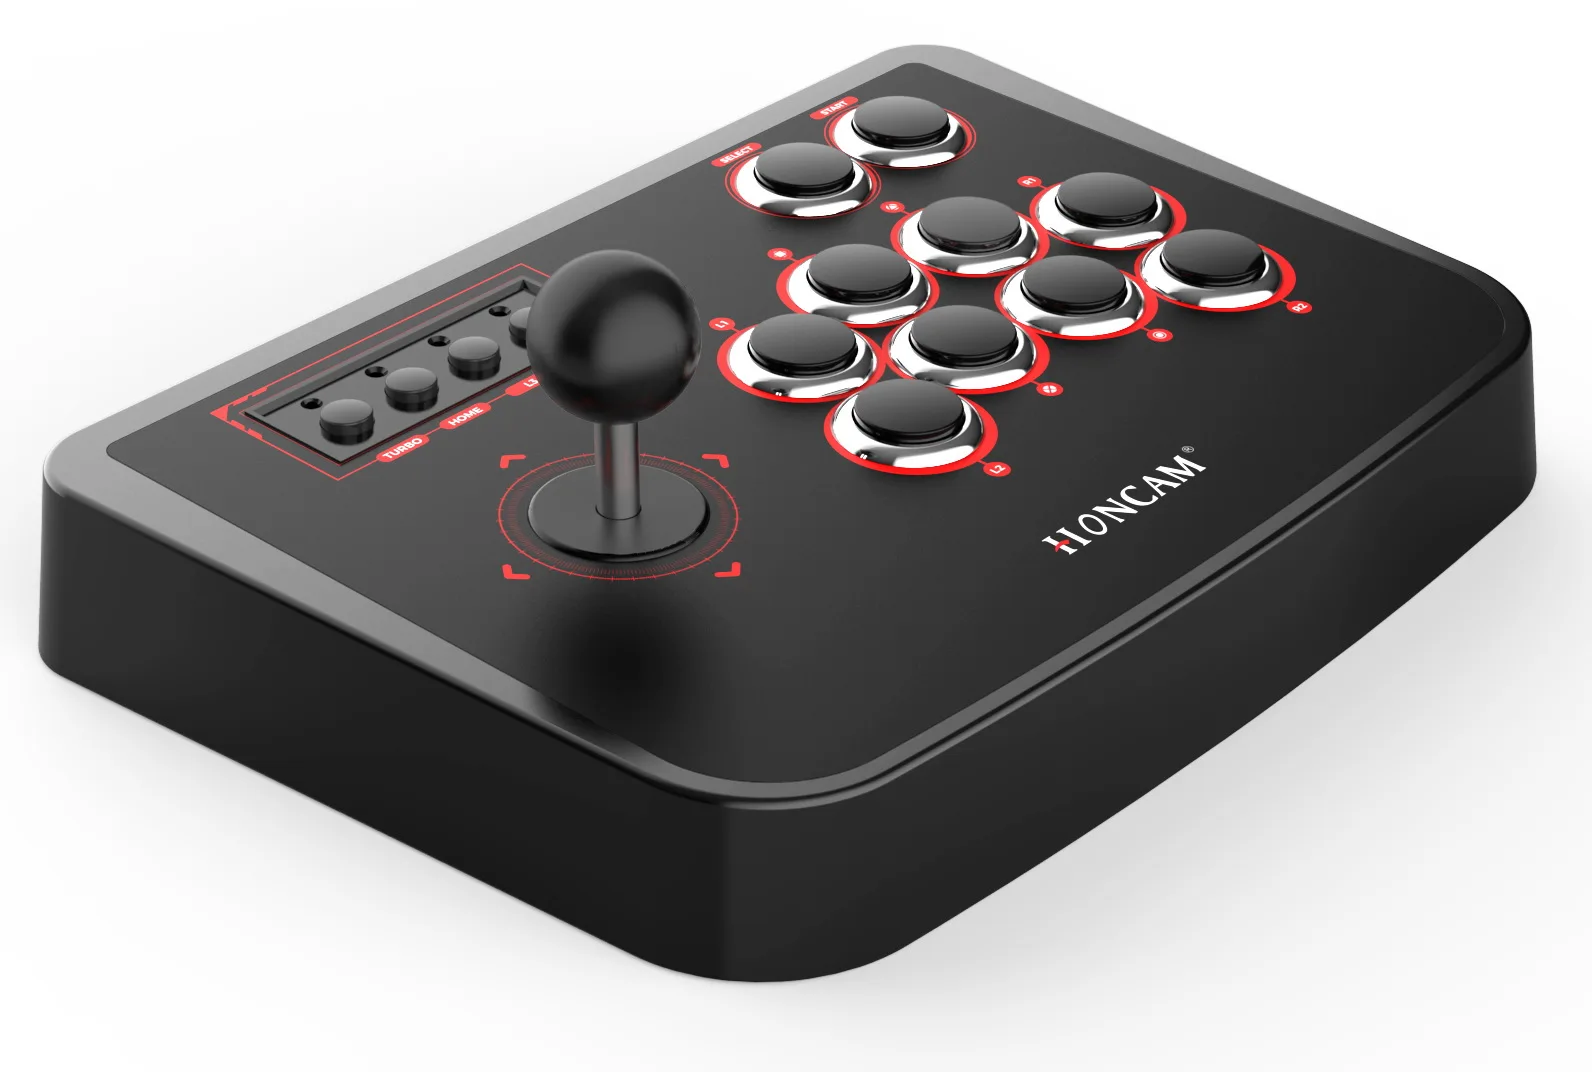 Pedicab cheekbone Disapproved Wholesale New Style Arcade Gamepad Joystick Fighting Stick for PS3/PS4/PC  From m.alibaba.com